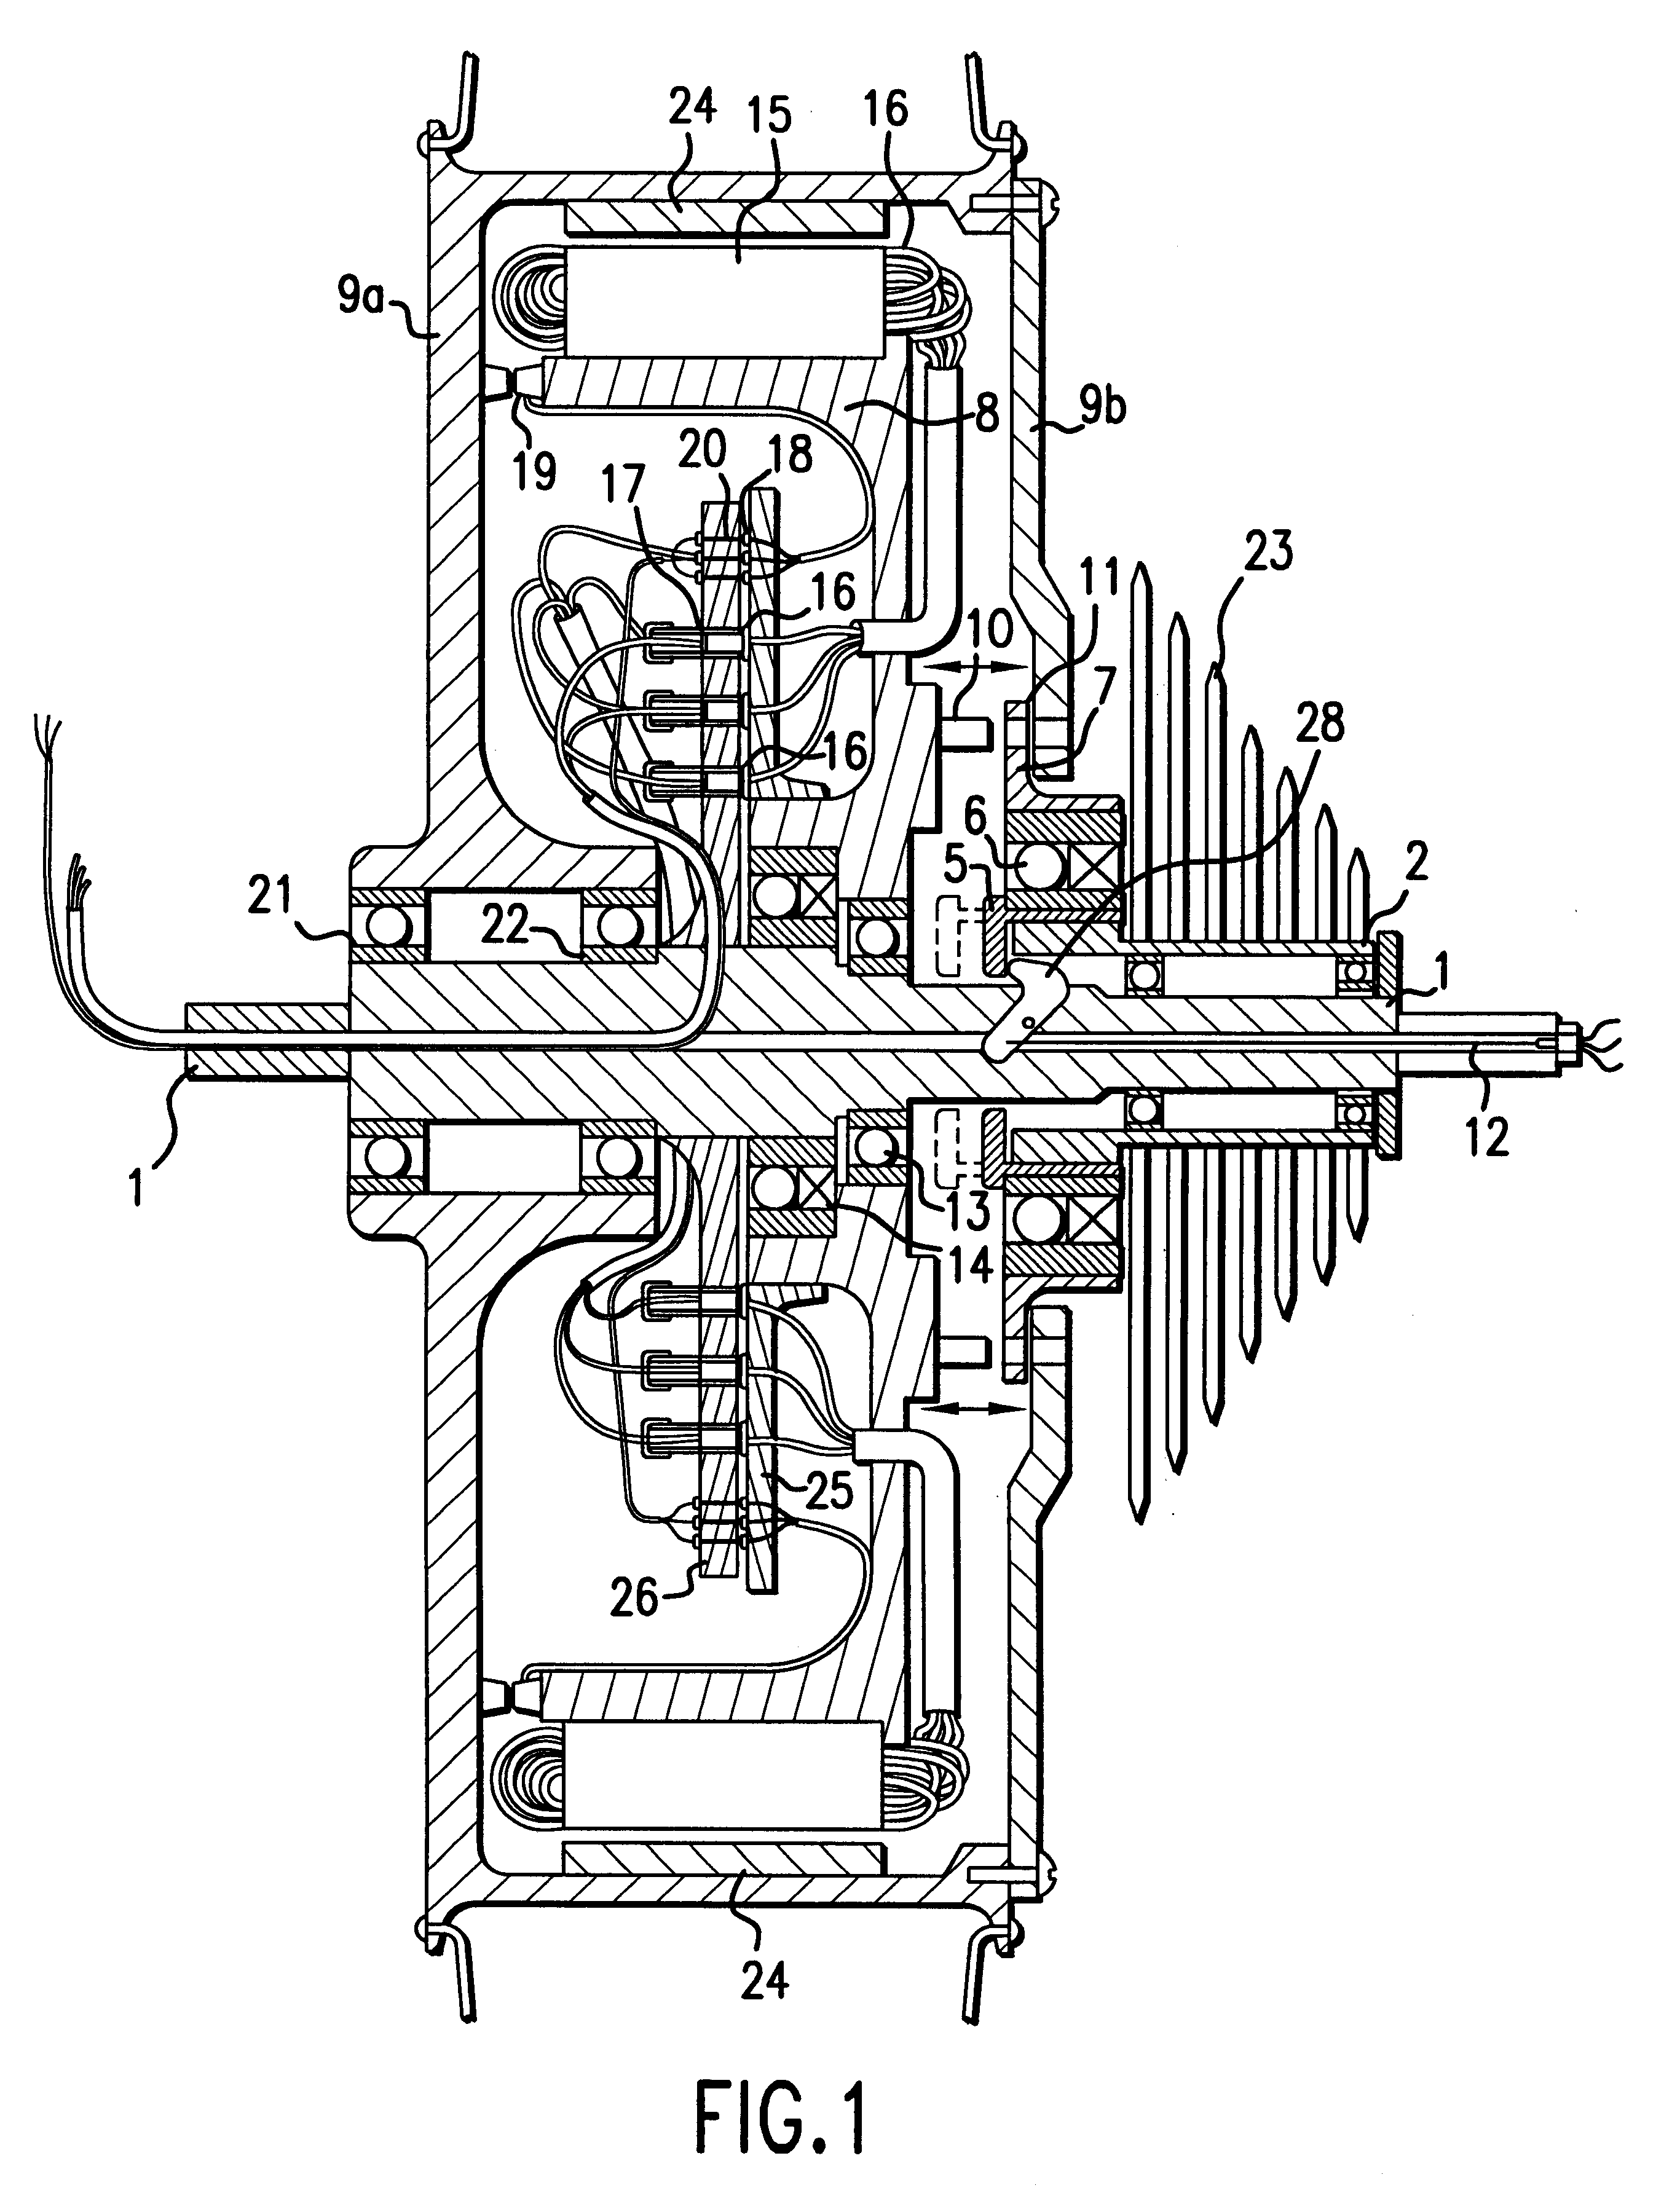 Hybrid drive mechanism for a vehicle driven by muscle power, with an auxiliary electric motor